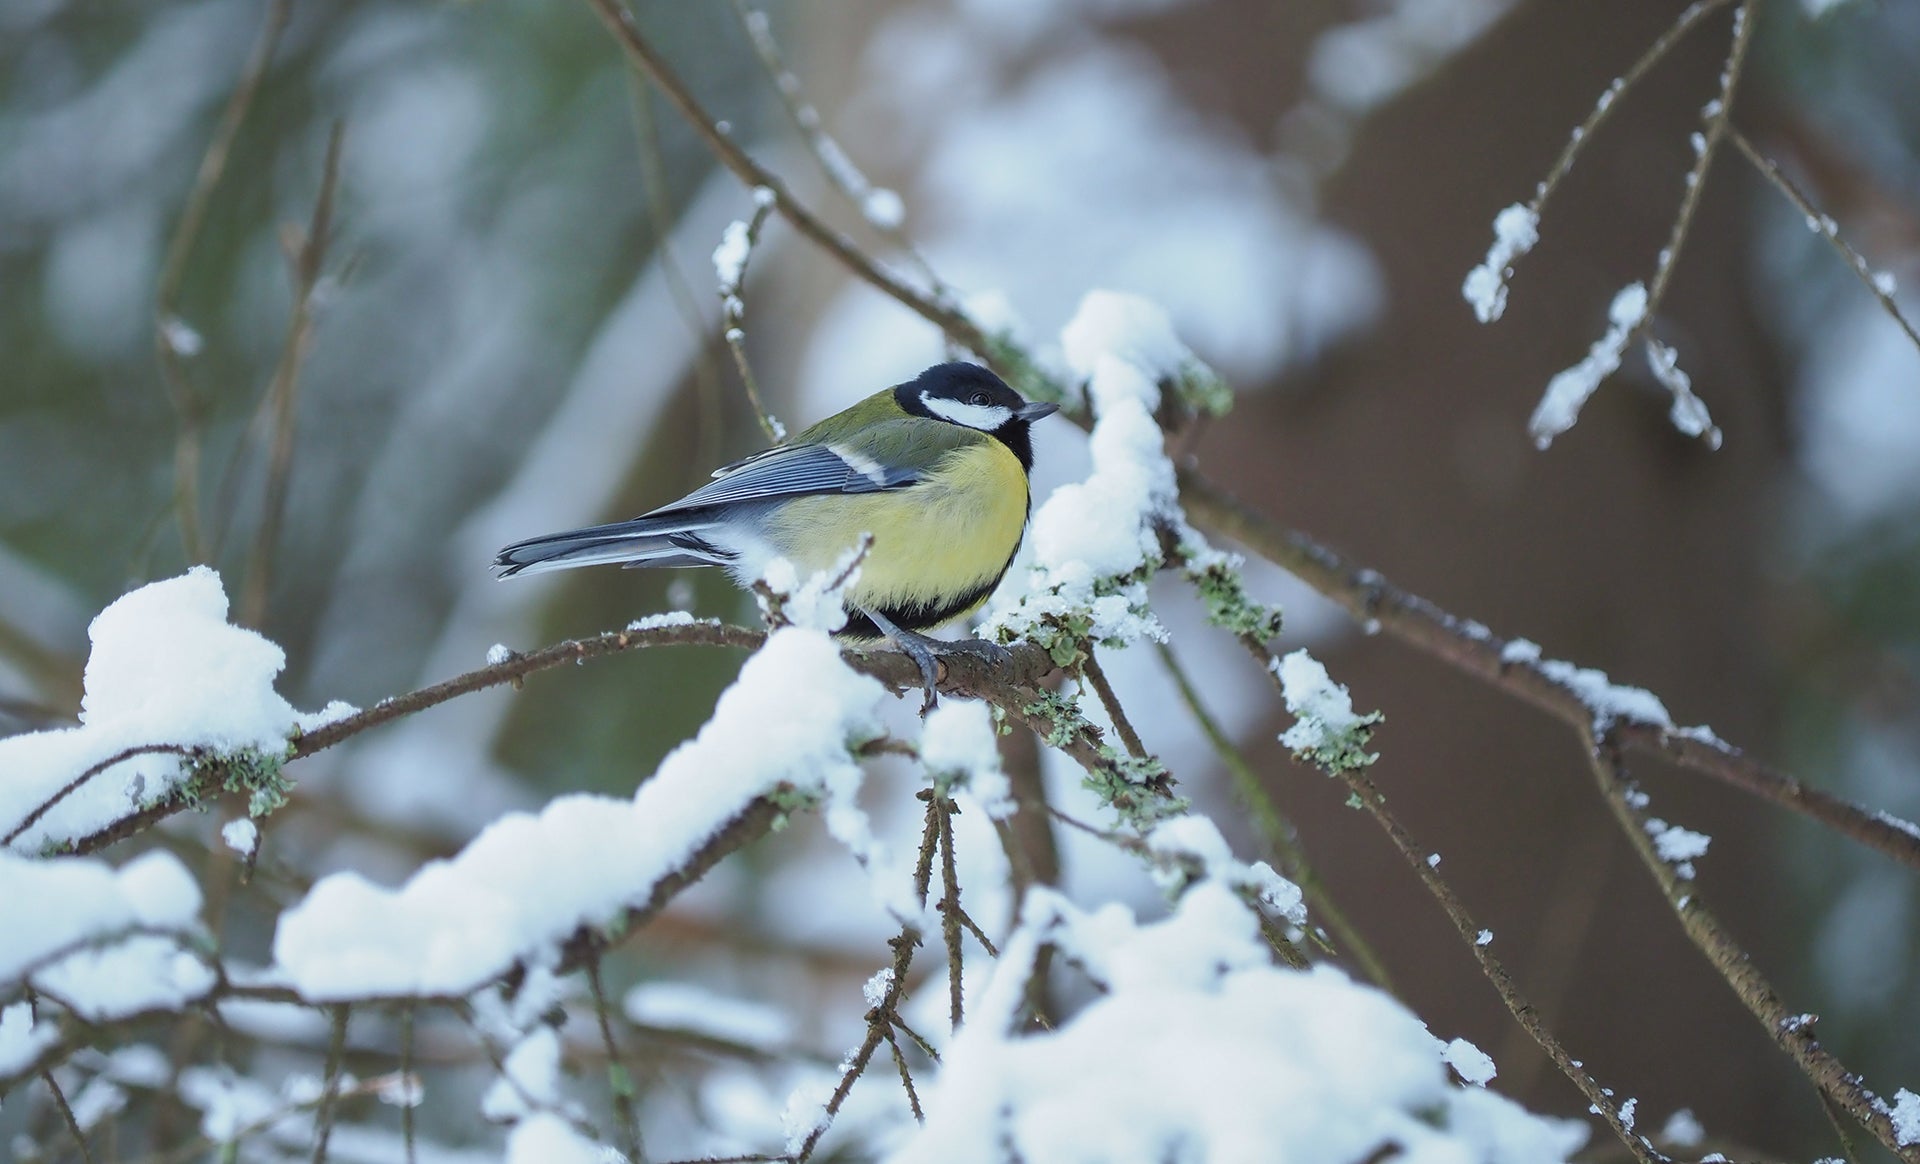 Feeding your garden birds and pond fish during the Winter